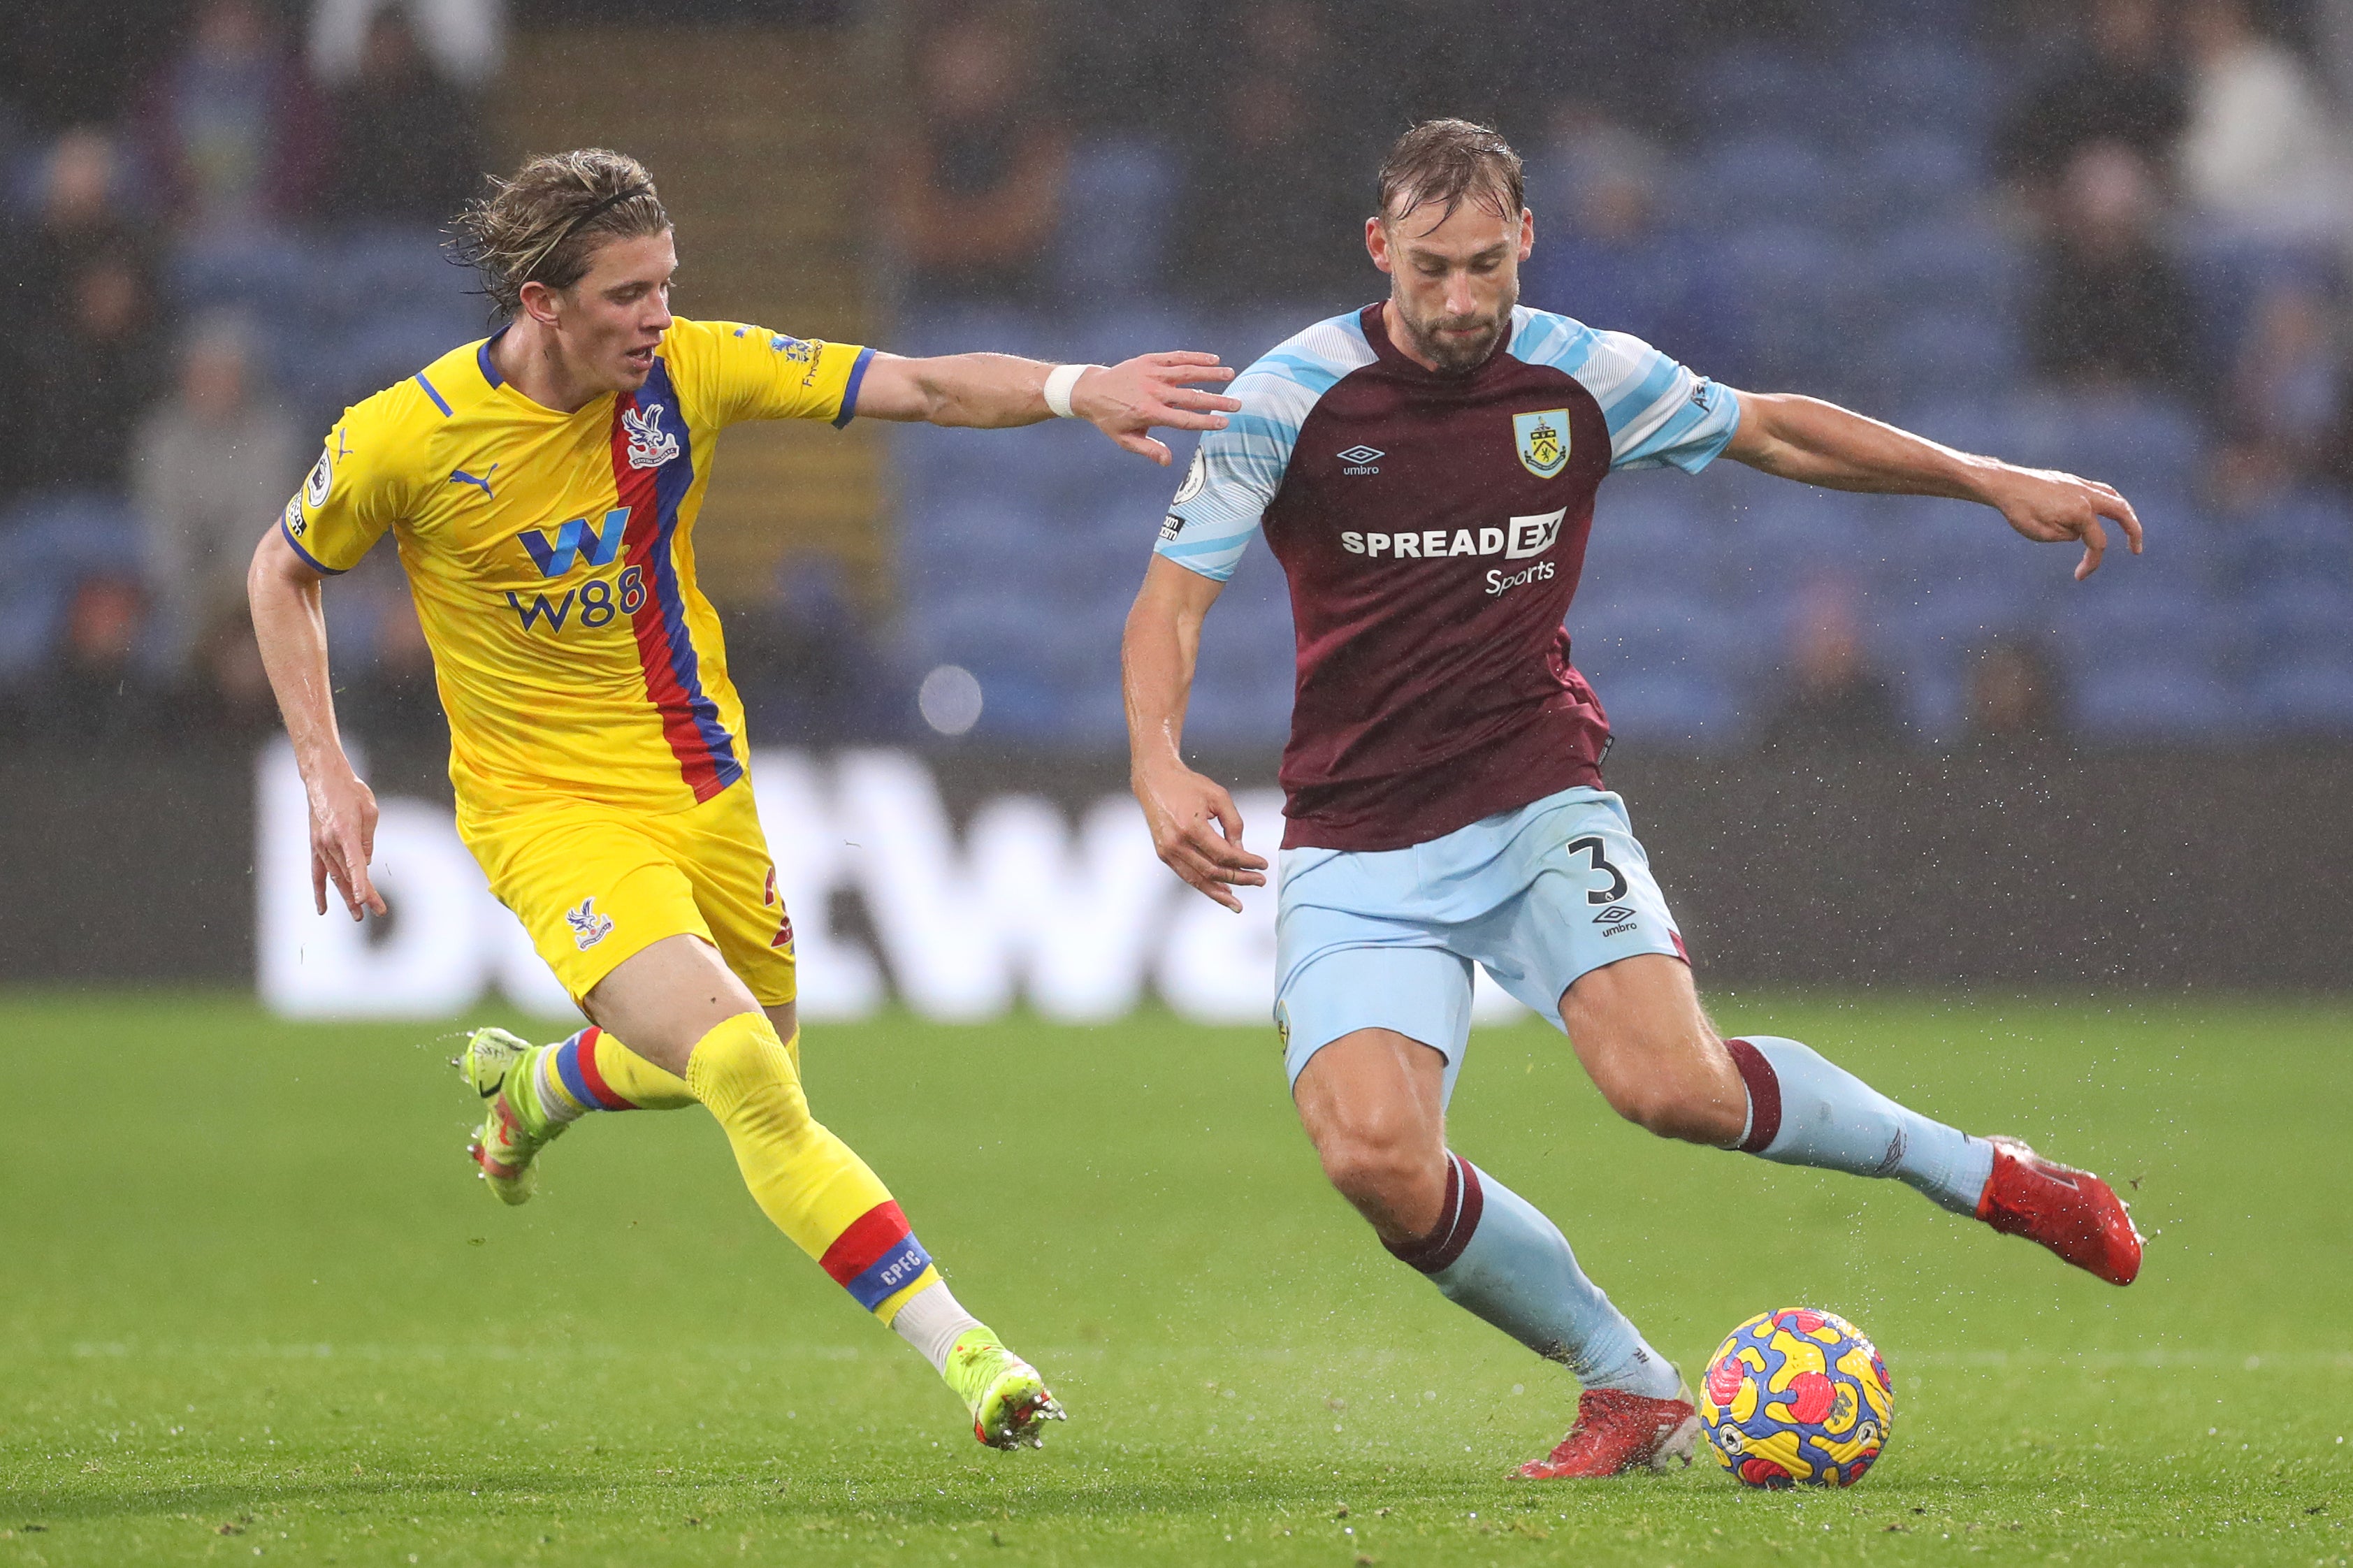 Taylor has yet to score since arriving at Turf Moor